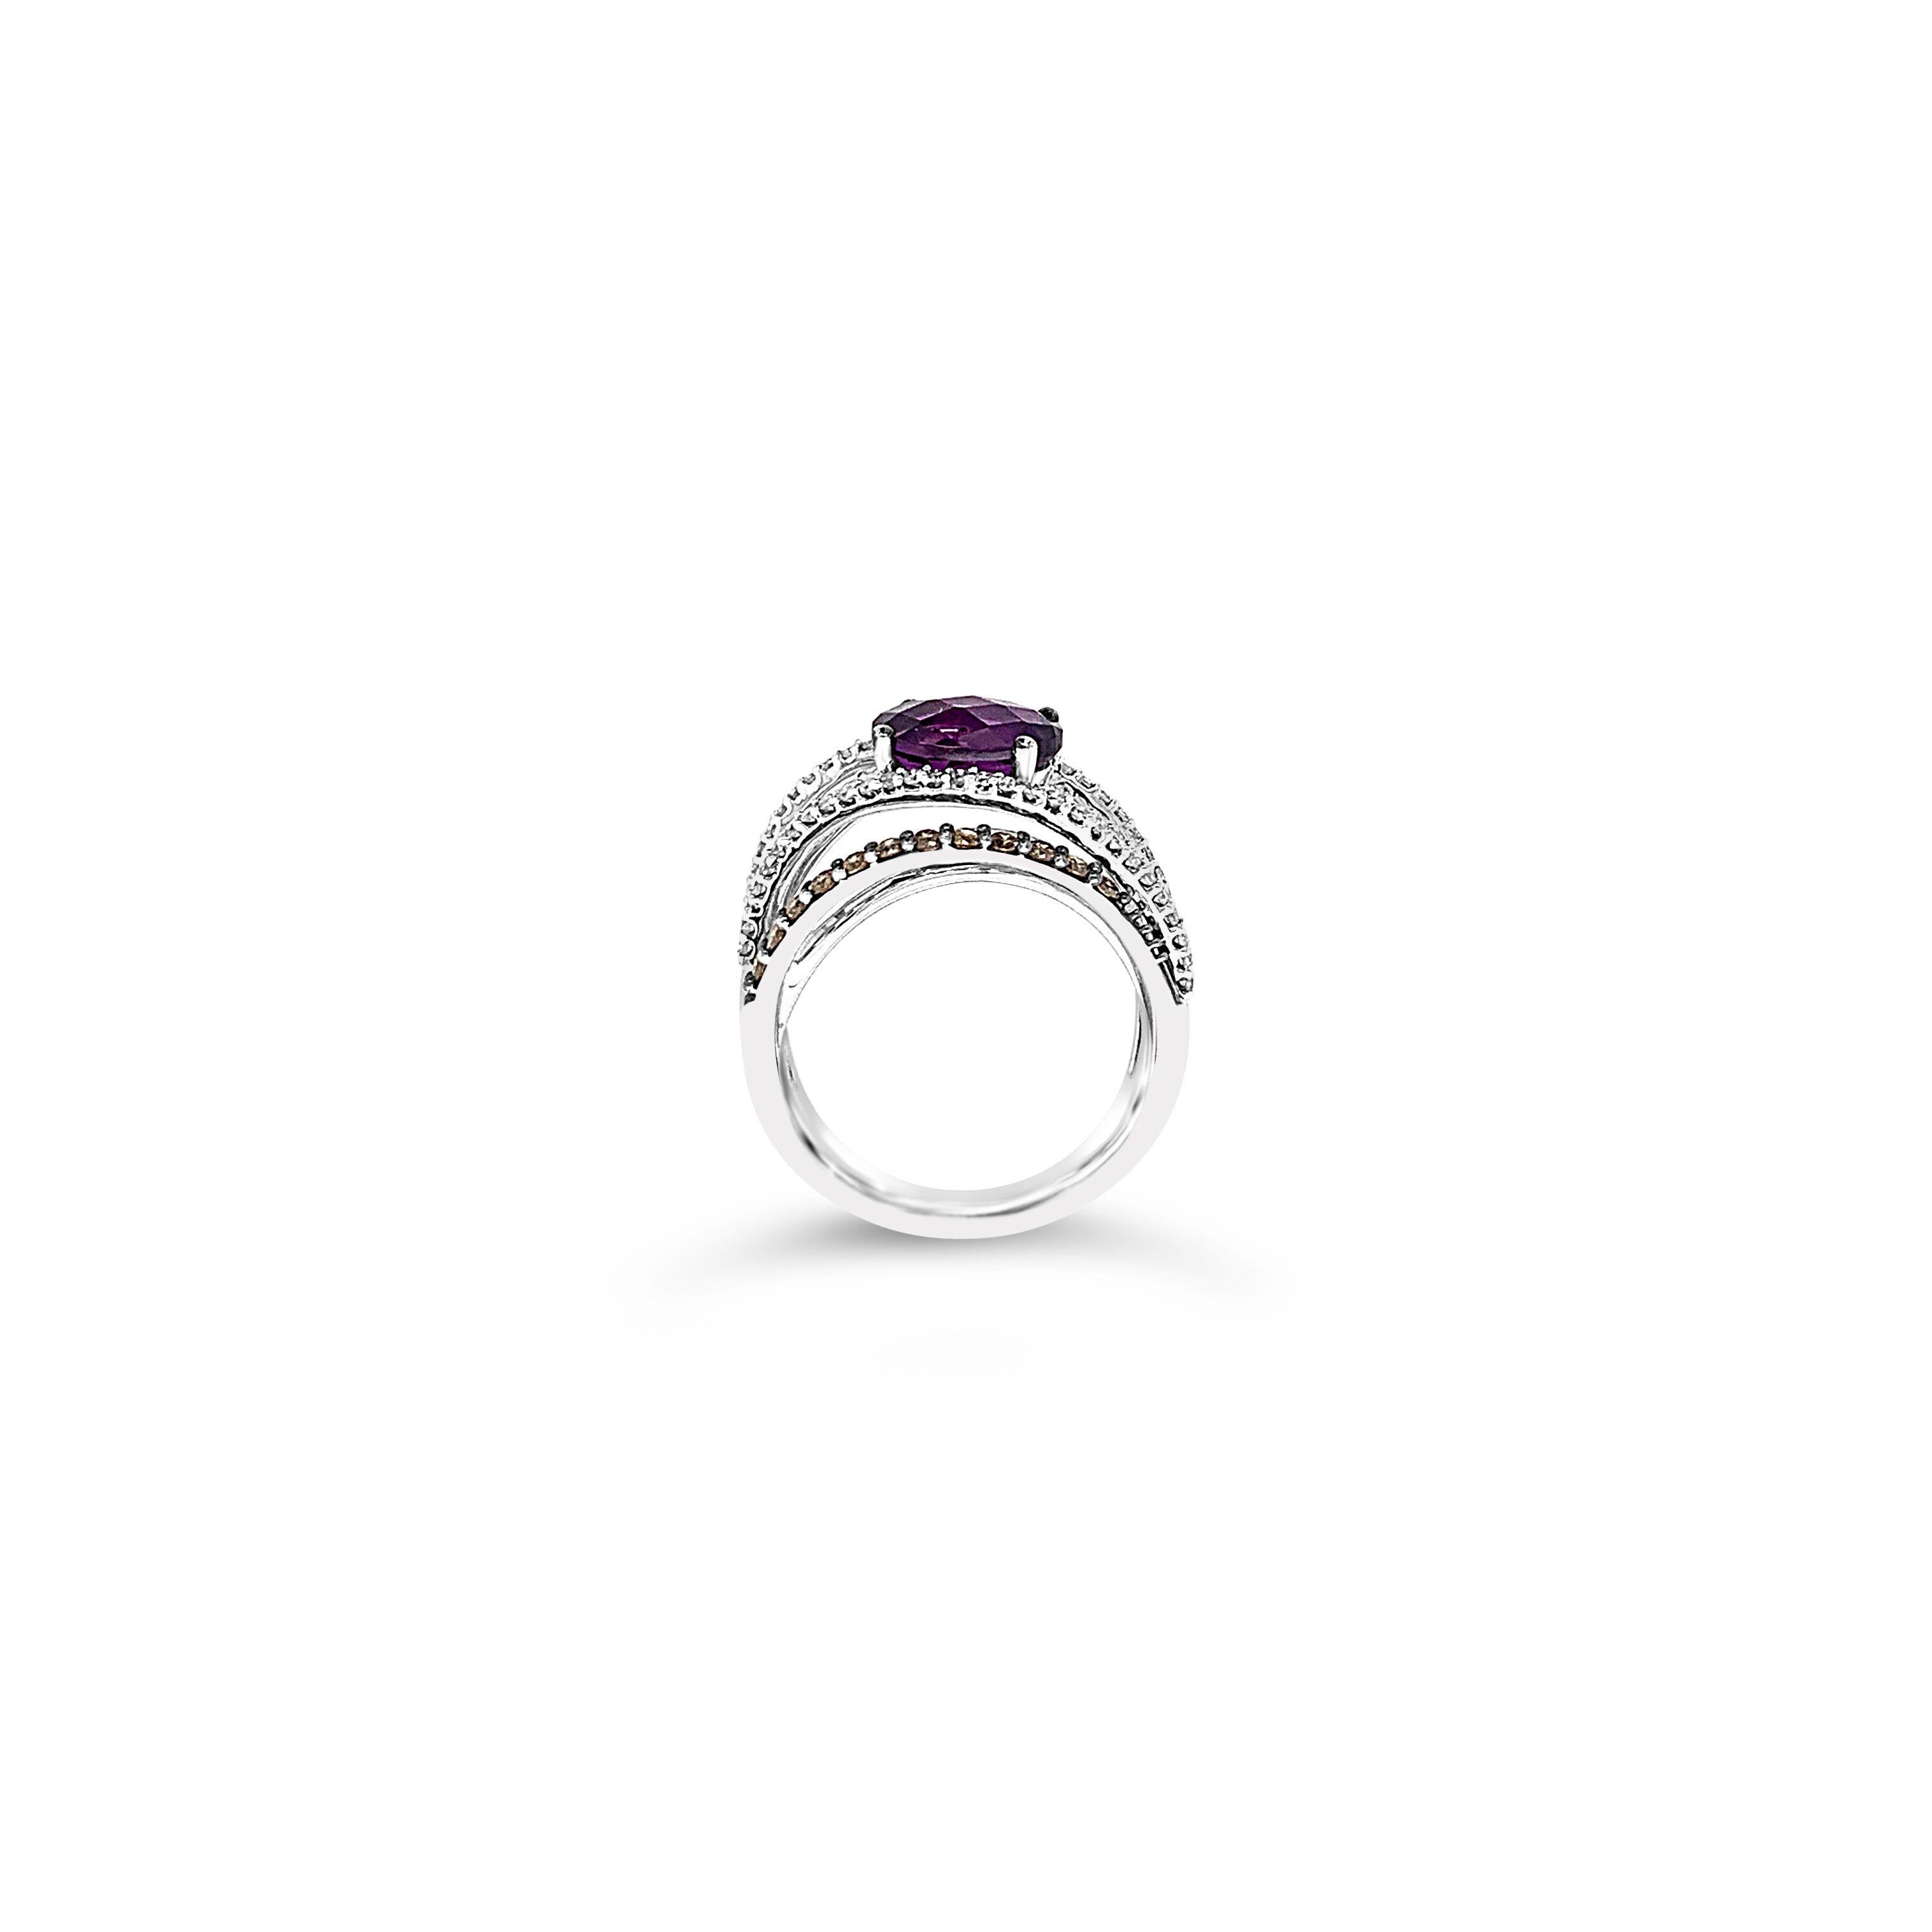 Le Vian® Ring featuring 1.45 cts Grape Amethyst™, .43 cts Chocolate Diamonds®, .27 cts Vanilla Diamonds® set in 14K Vanilla Gold®

Diamonds Breakdown:
.43 cts Brown Diamonds
.27 cts White Diamonds

Gems Breakdown:
1.45 cts Amethyst

Ring may or may